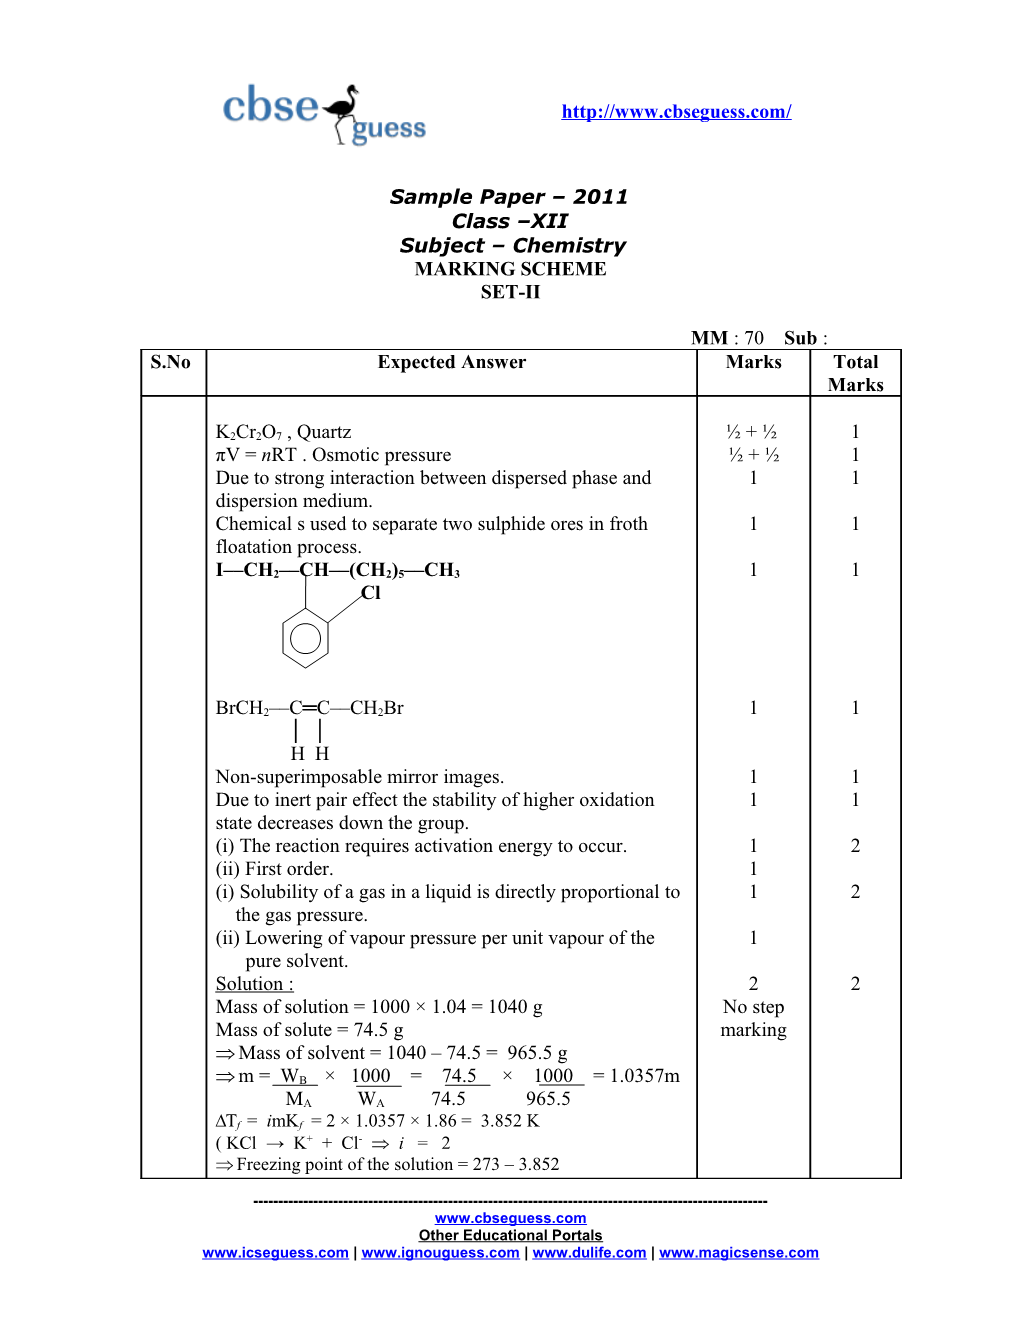 Sample Paper 2011 Class XII Subject Chemistry s1